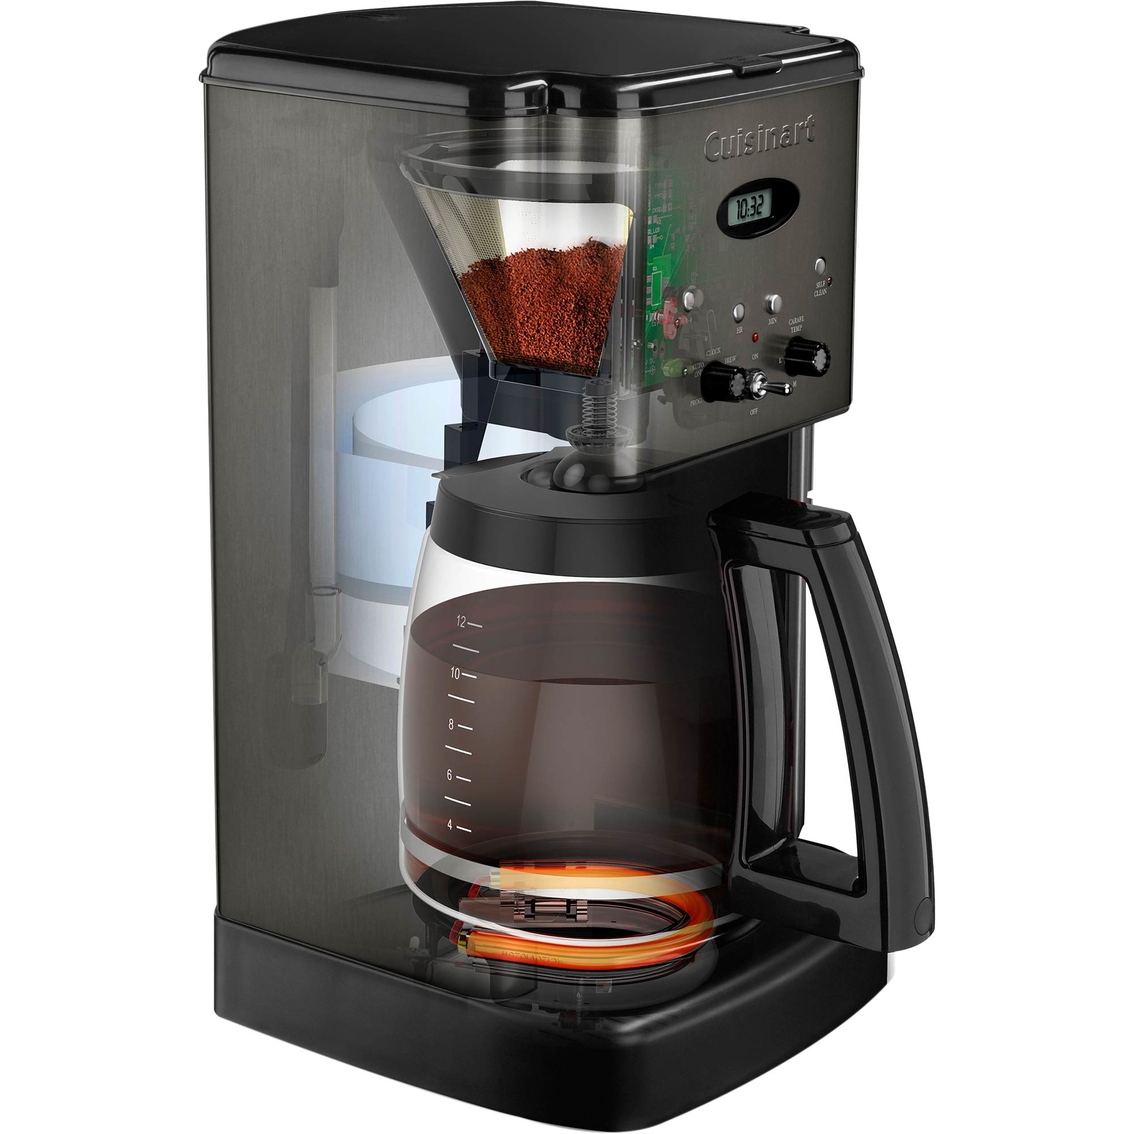 Cuisinart Brew Central 12 Cup Coffeemaker - Image 3 of 3